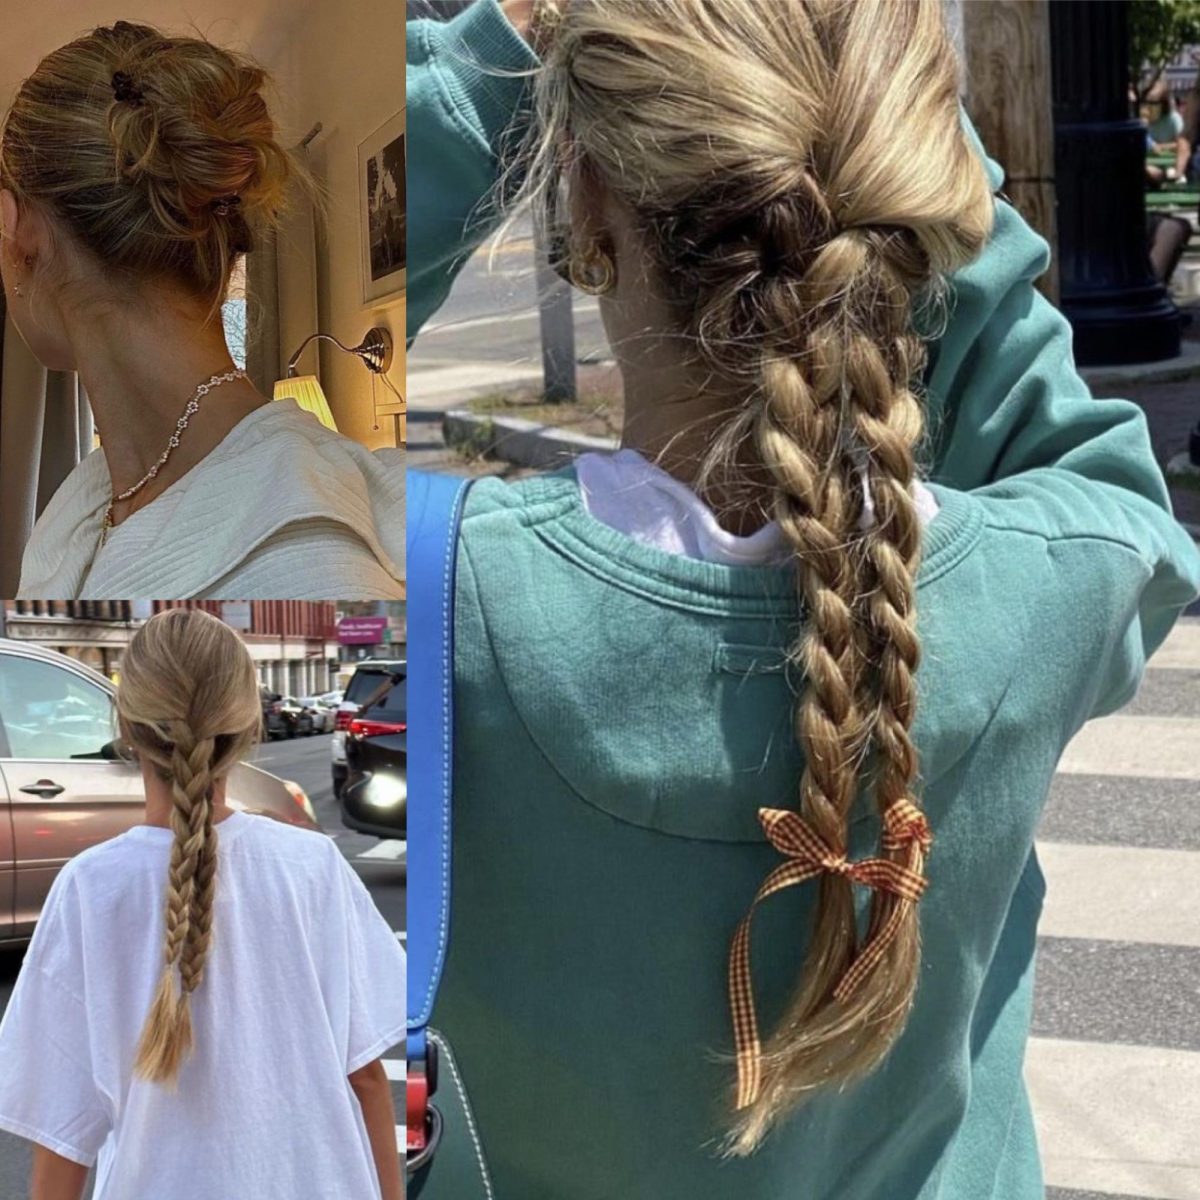 My favorite hairstyles: layered braids (bottom left), crossed braids (right), and a knotted bun (top left).